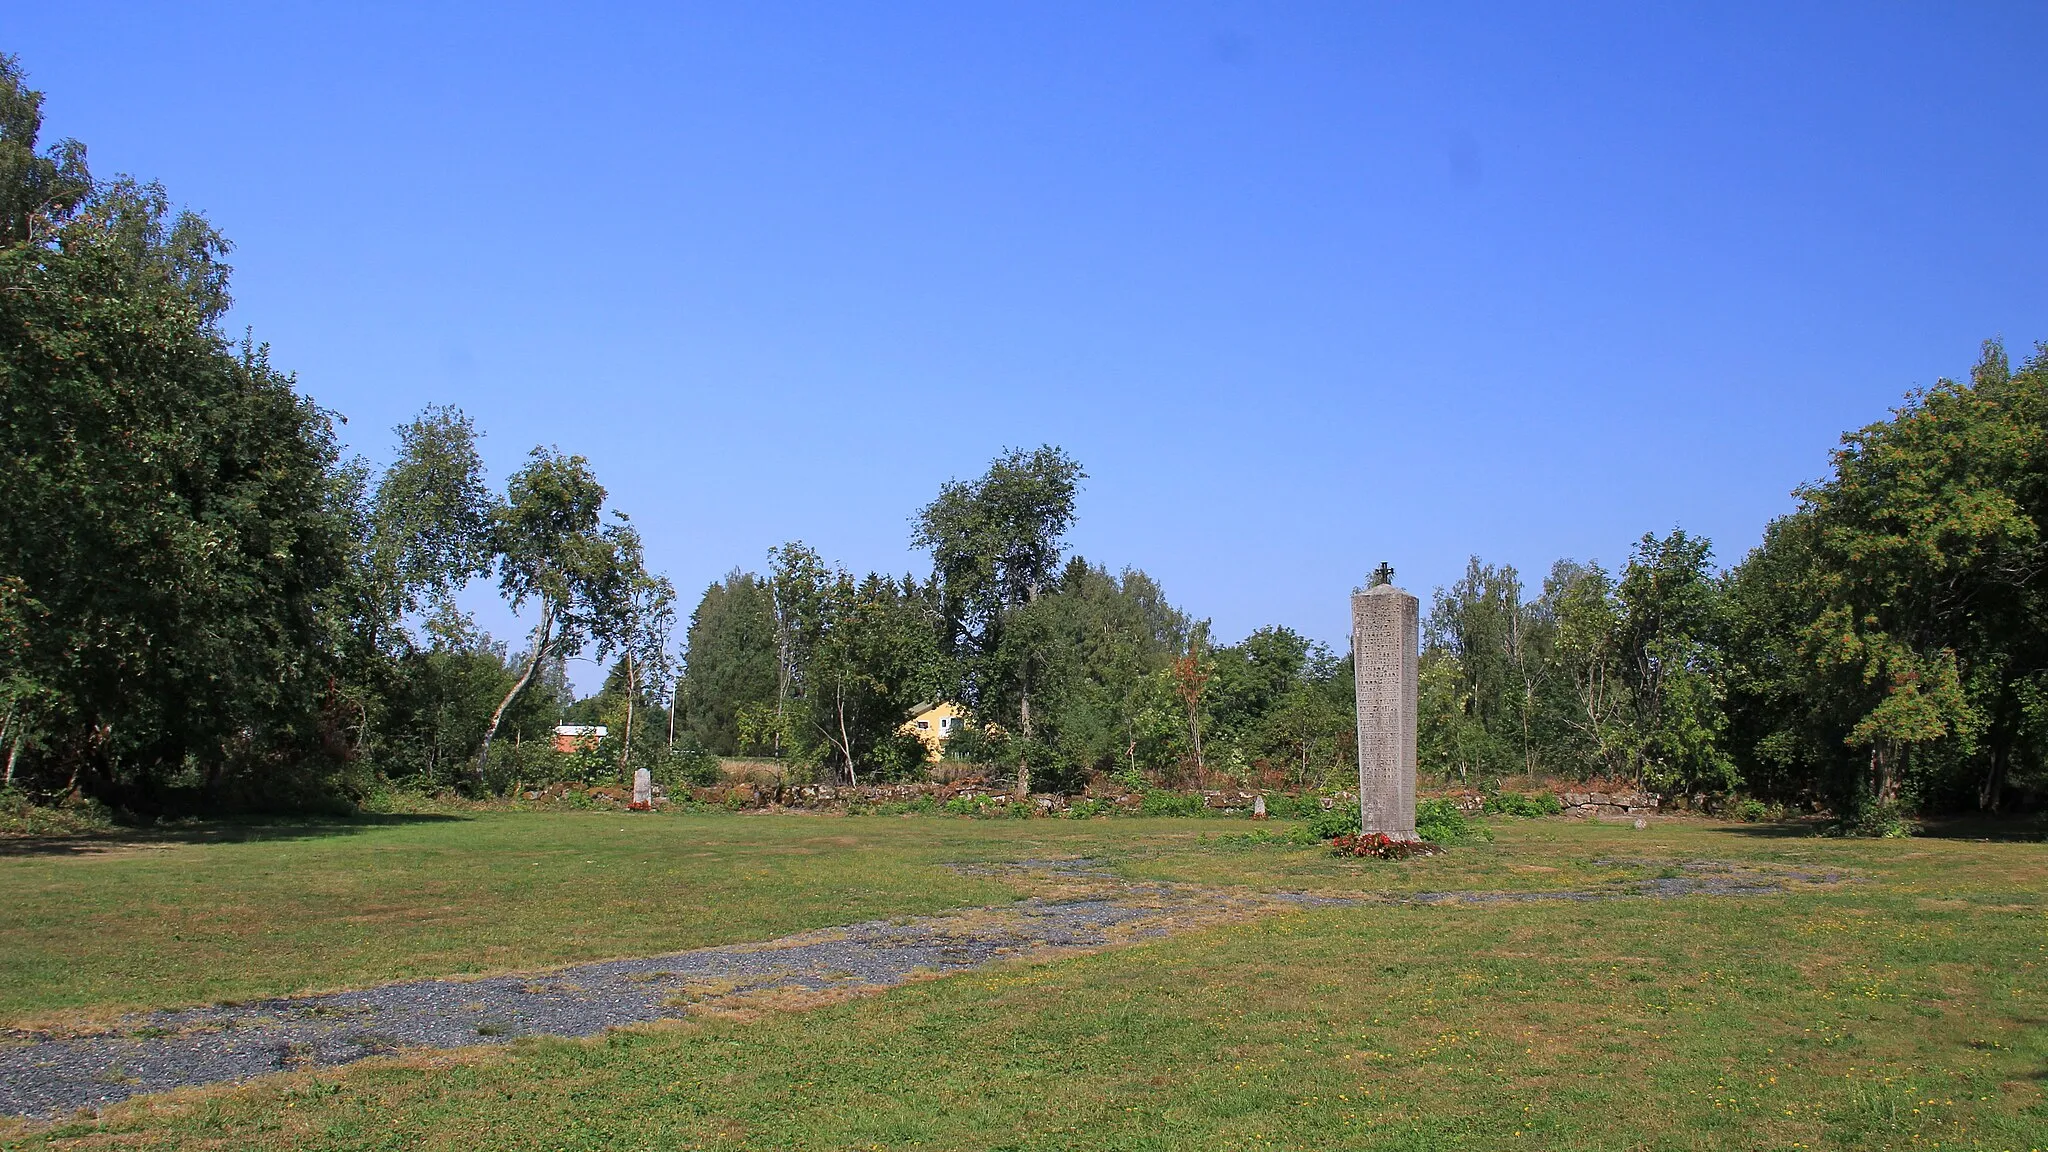 Photo showing: Napue park, Laihia, Finland. - View from gate. Statue is Memorial of Battle of Napue, unveiled in 1925 as a memorial for the 120 men from Laihia who died during the battle. Battle of Napue was fought on 19 February 1714 in Isokyrö.